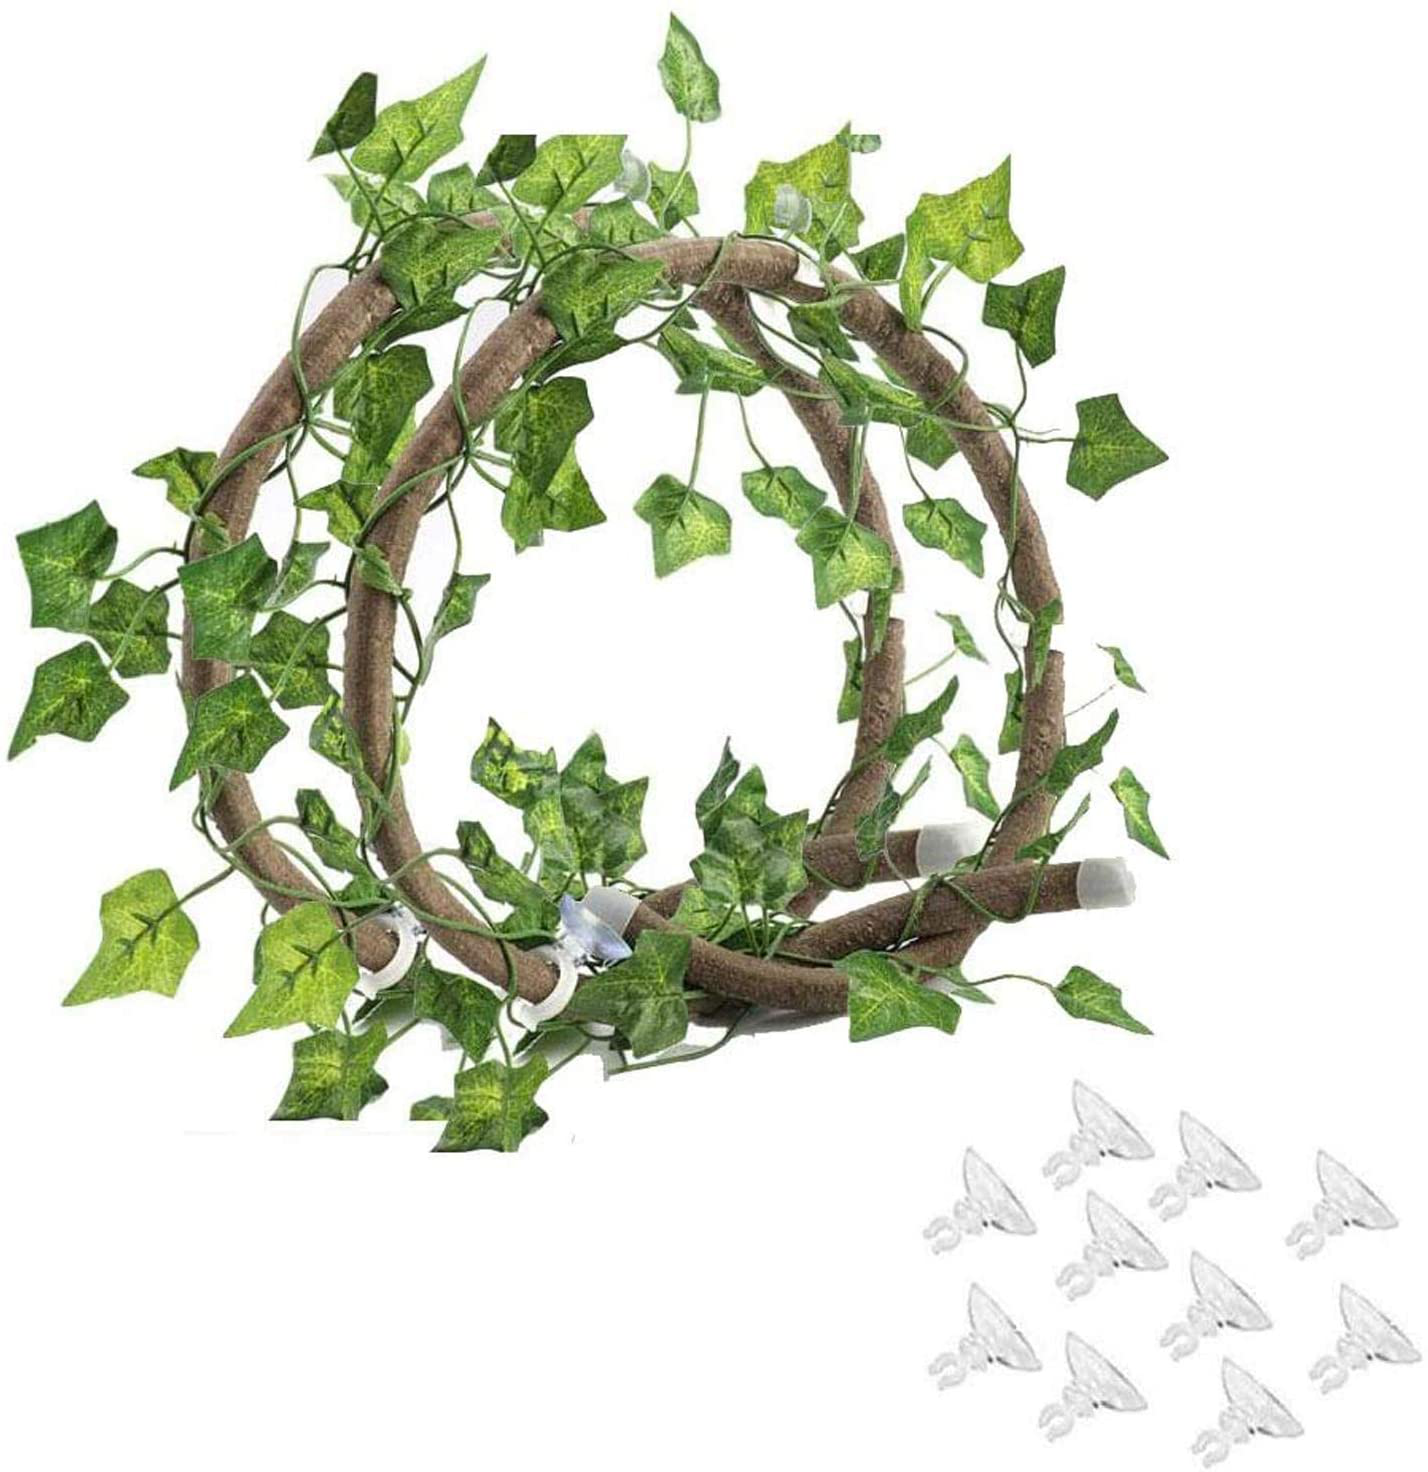 Tfwadmx Reptiles Jungle Vines Bend a Branch Ivy 4Pcs Artificial Fake Leaves Habitat Ornaments for Chameleons, Snakes, Lizards, Frogs Animals & Pet Supplies > Pet Supplies > Reptile & Amphibian Supplies > Reptile & Amphibian Habitat Accessories Tfwadmx   